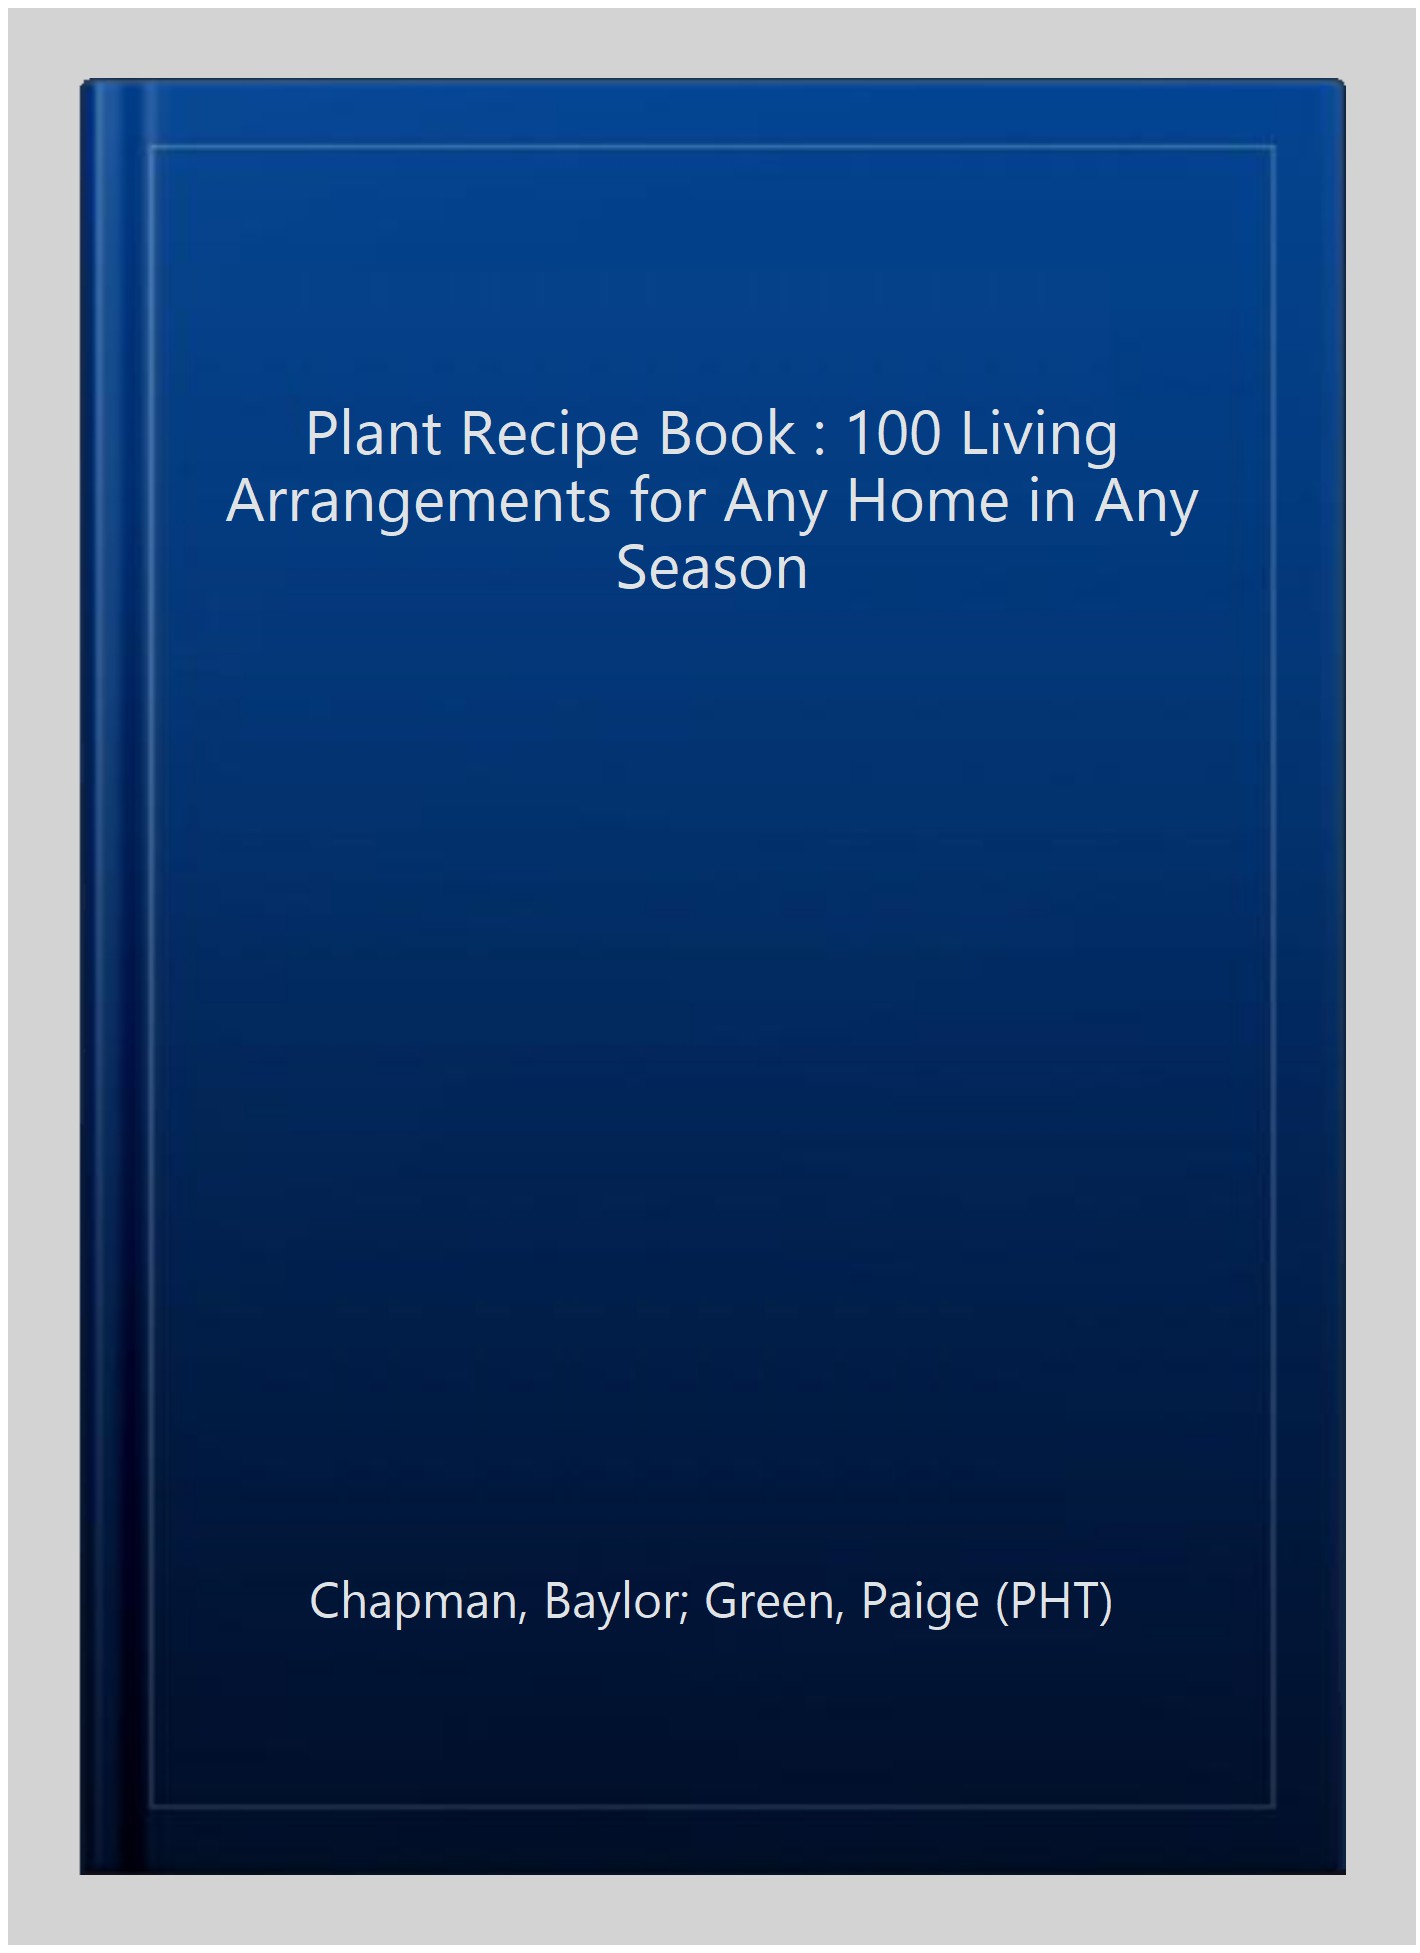 in　Plant　Season,　(PHT),　Book　Arrangements　Chapman,　Living　Green,　Hardcover　100　by　ISBN-13　9781579655518　for　Recipe　Home　Any　ISBN　Baylor;　Paige　Any　Pre-owned:　1579655513,